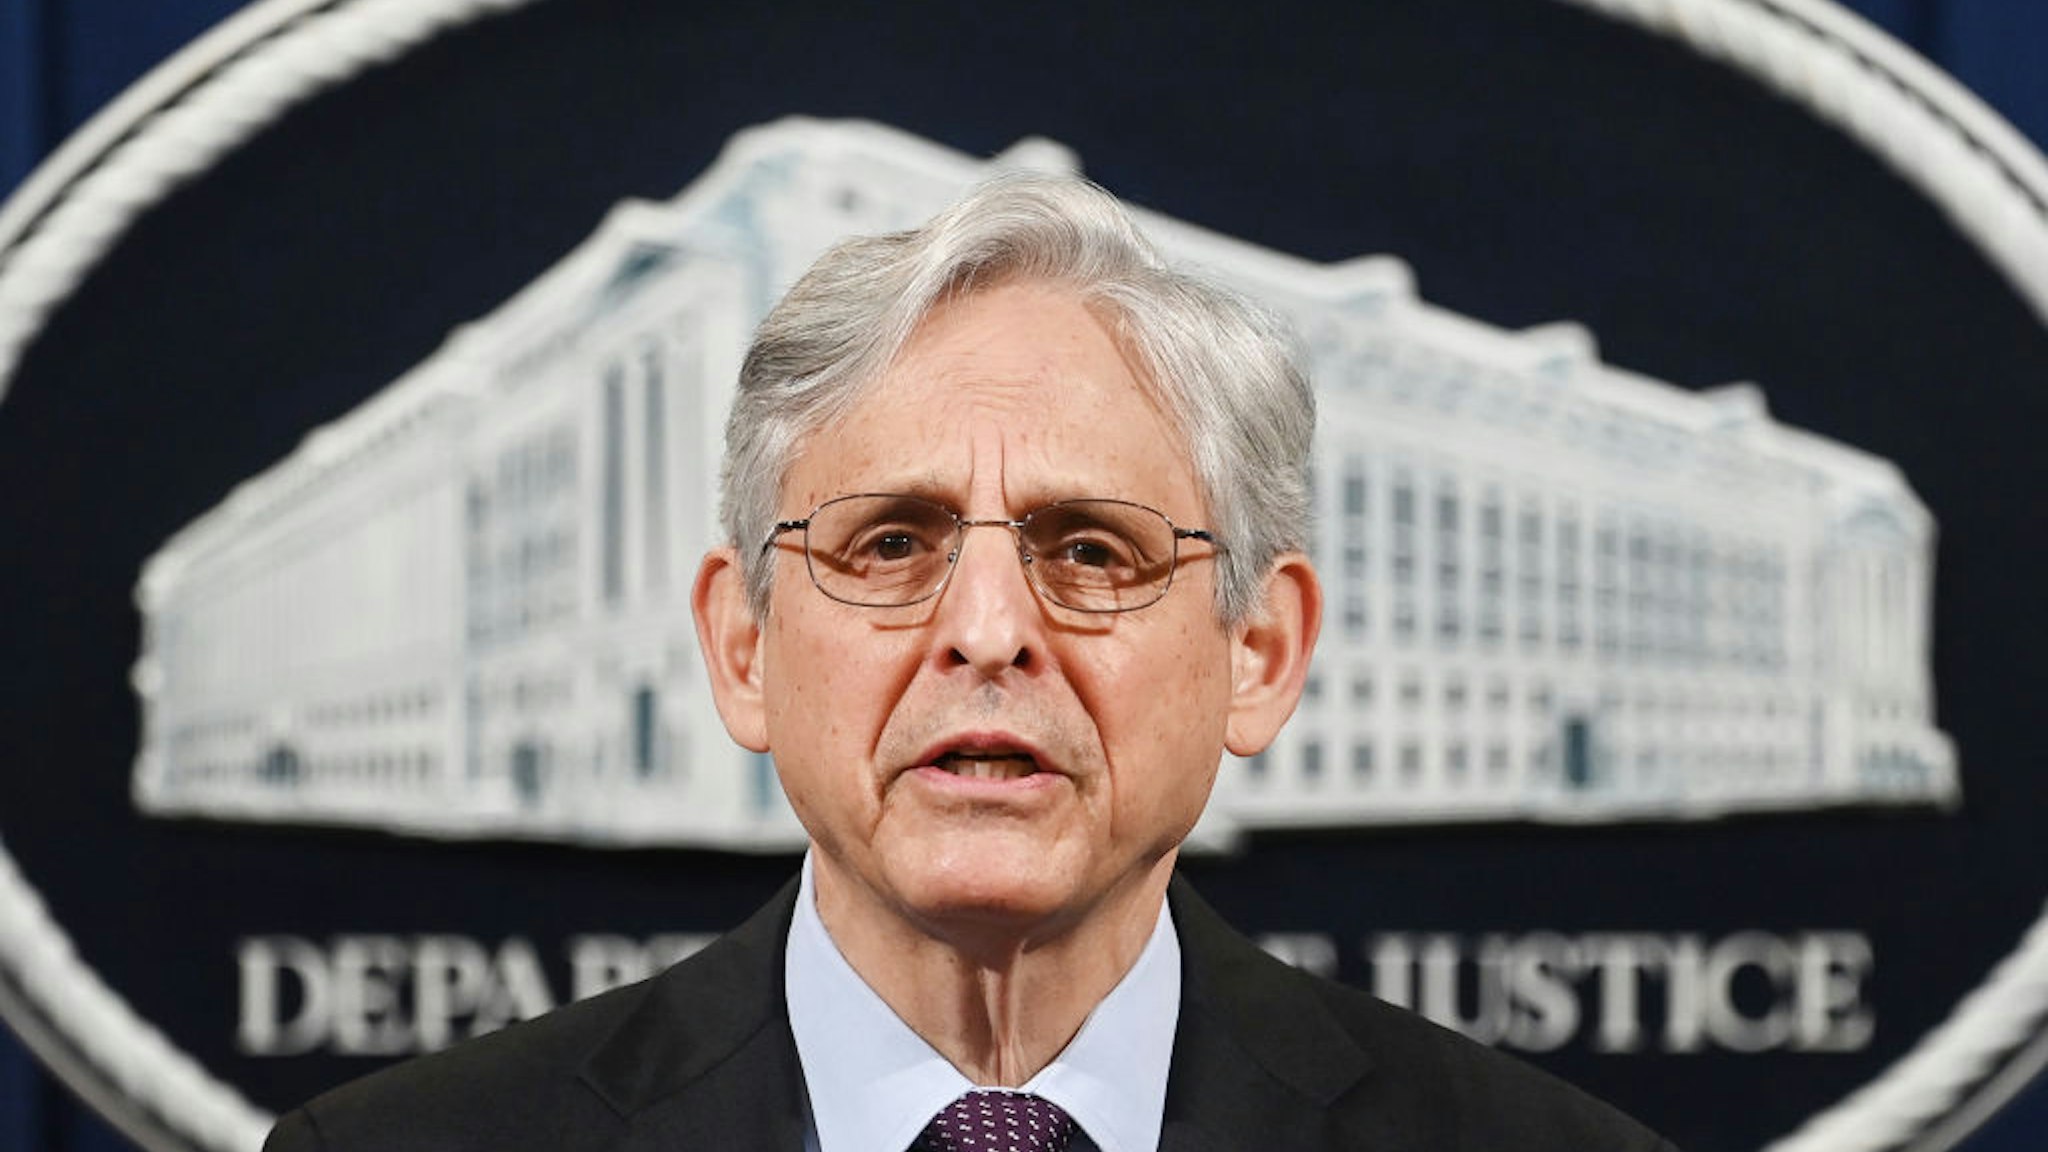 Attorney General Merrick Garland Announces Justice Department will begin Investigation Into The Practices of the Louisville Police Department